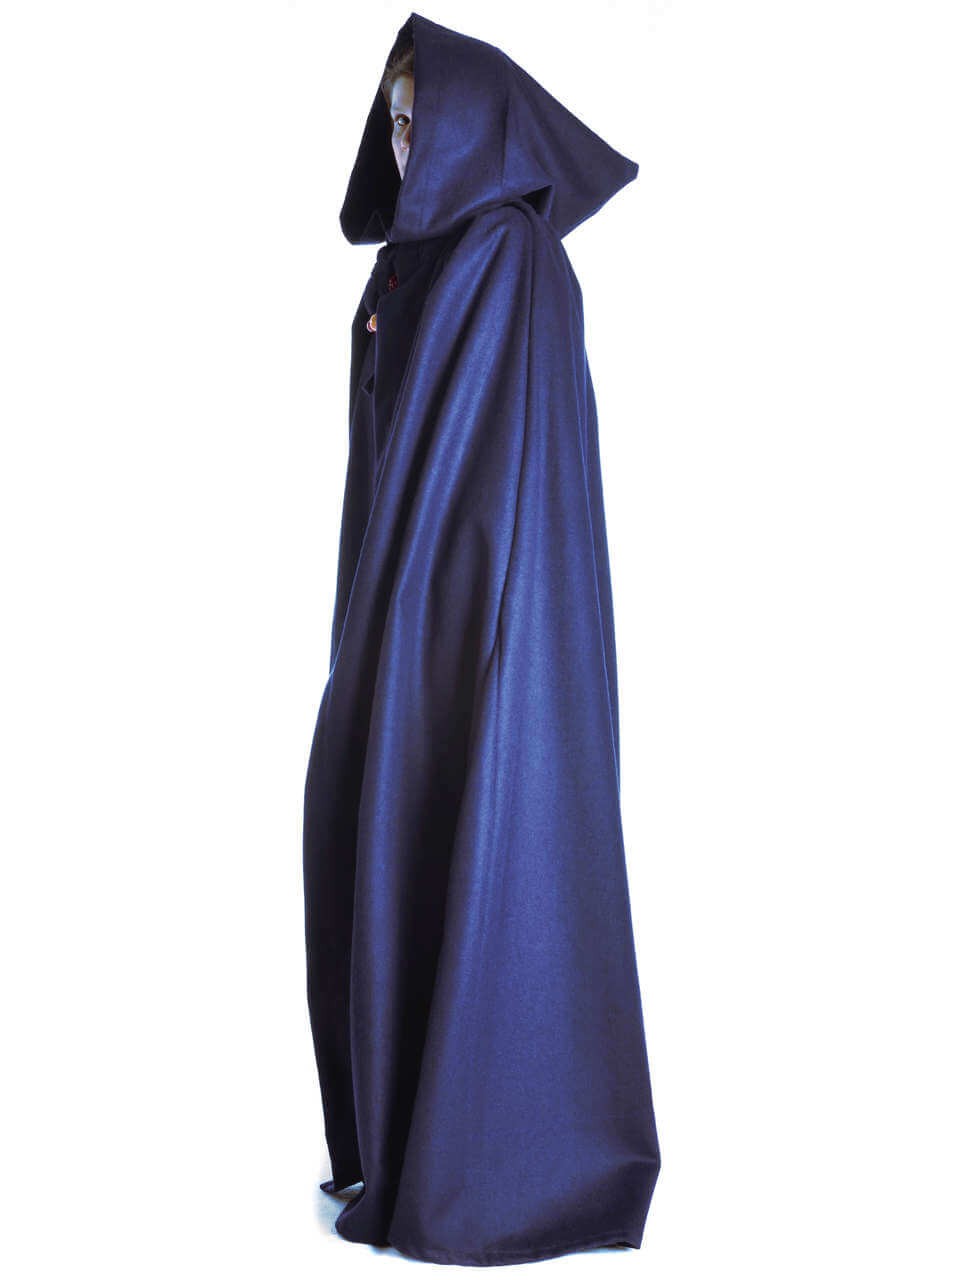 Medieval Hooded Cloak/Cape (Blue,Green,Black,Red,Brown) - 5003 –  Inter-Moden California